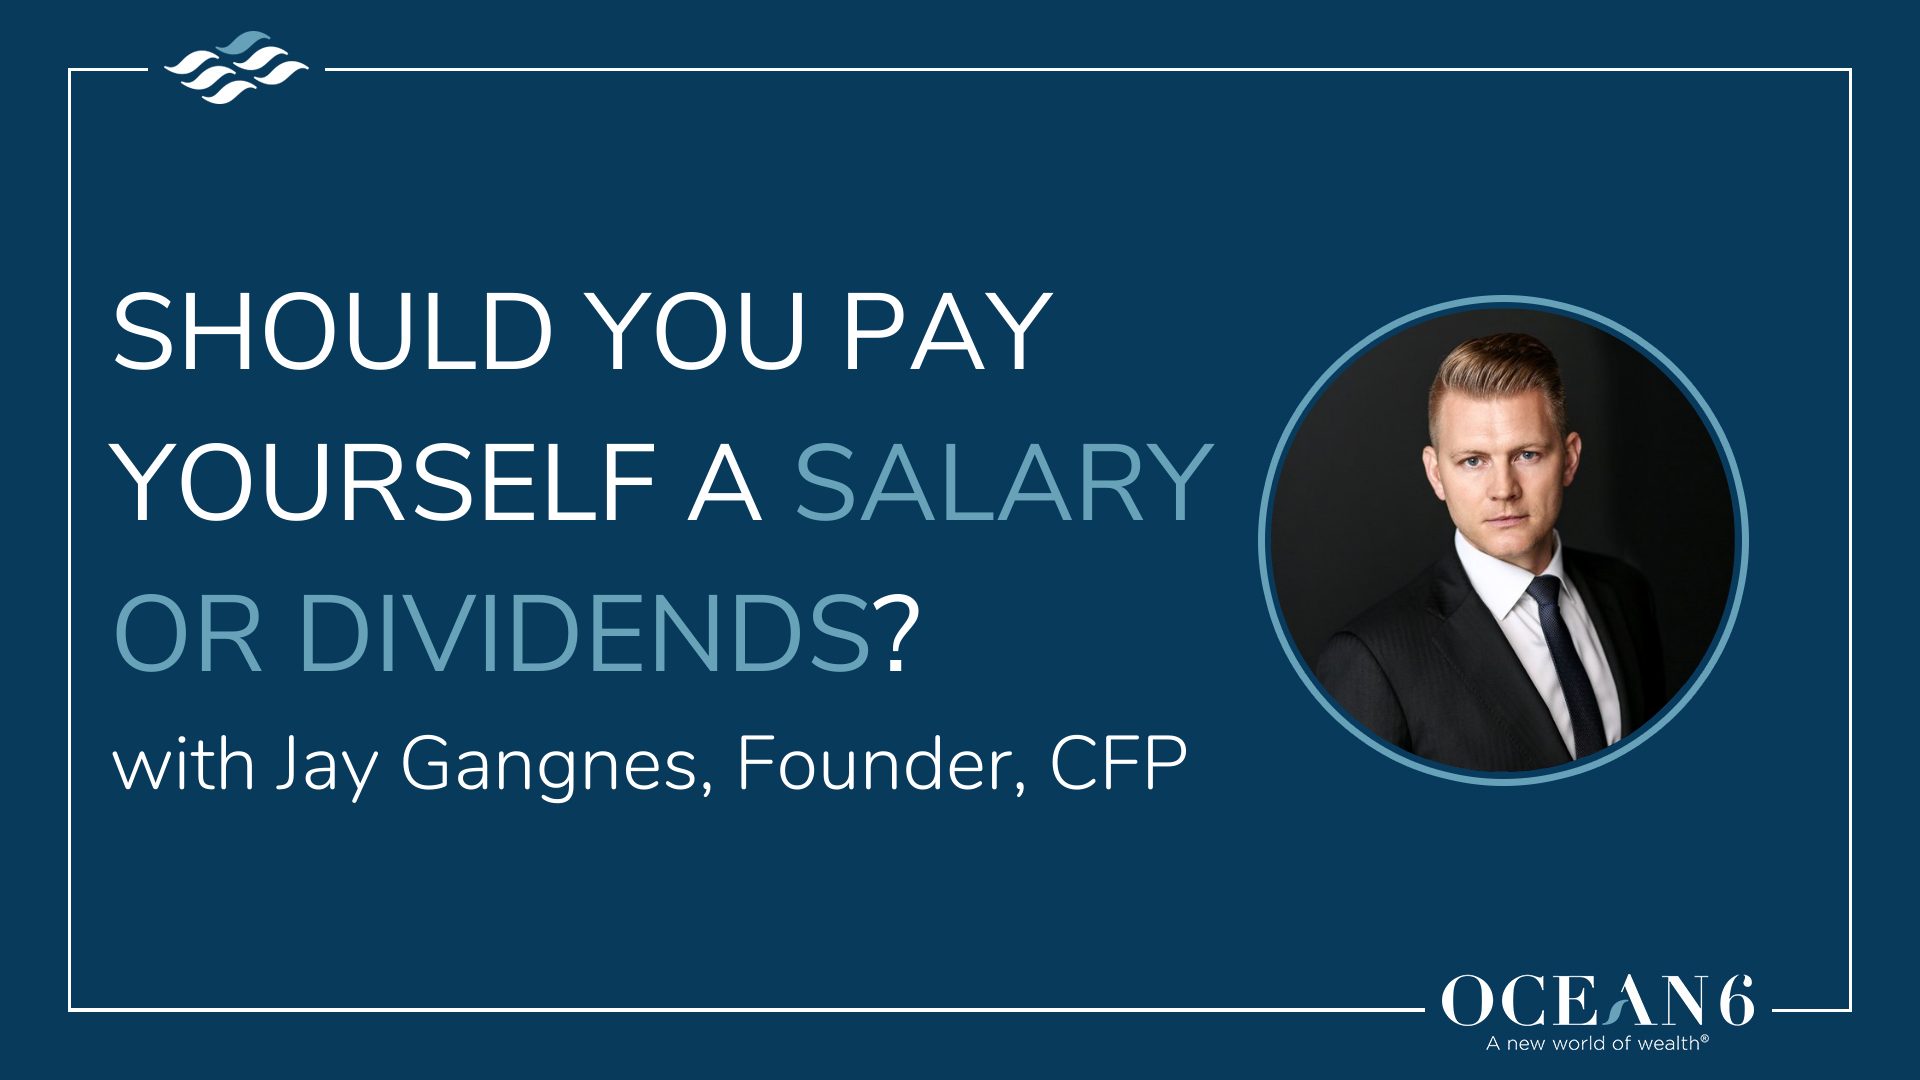 How To Pay Yourself If You’re Incorporated (Salary Vs. Dividends)